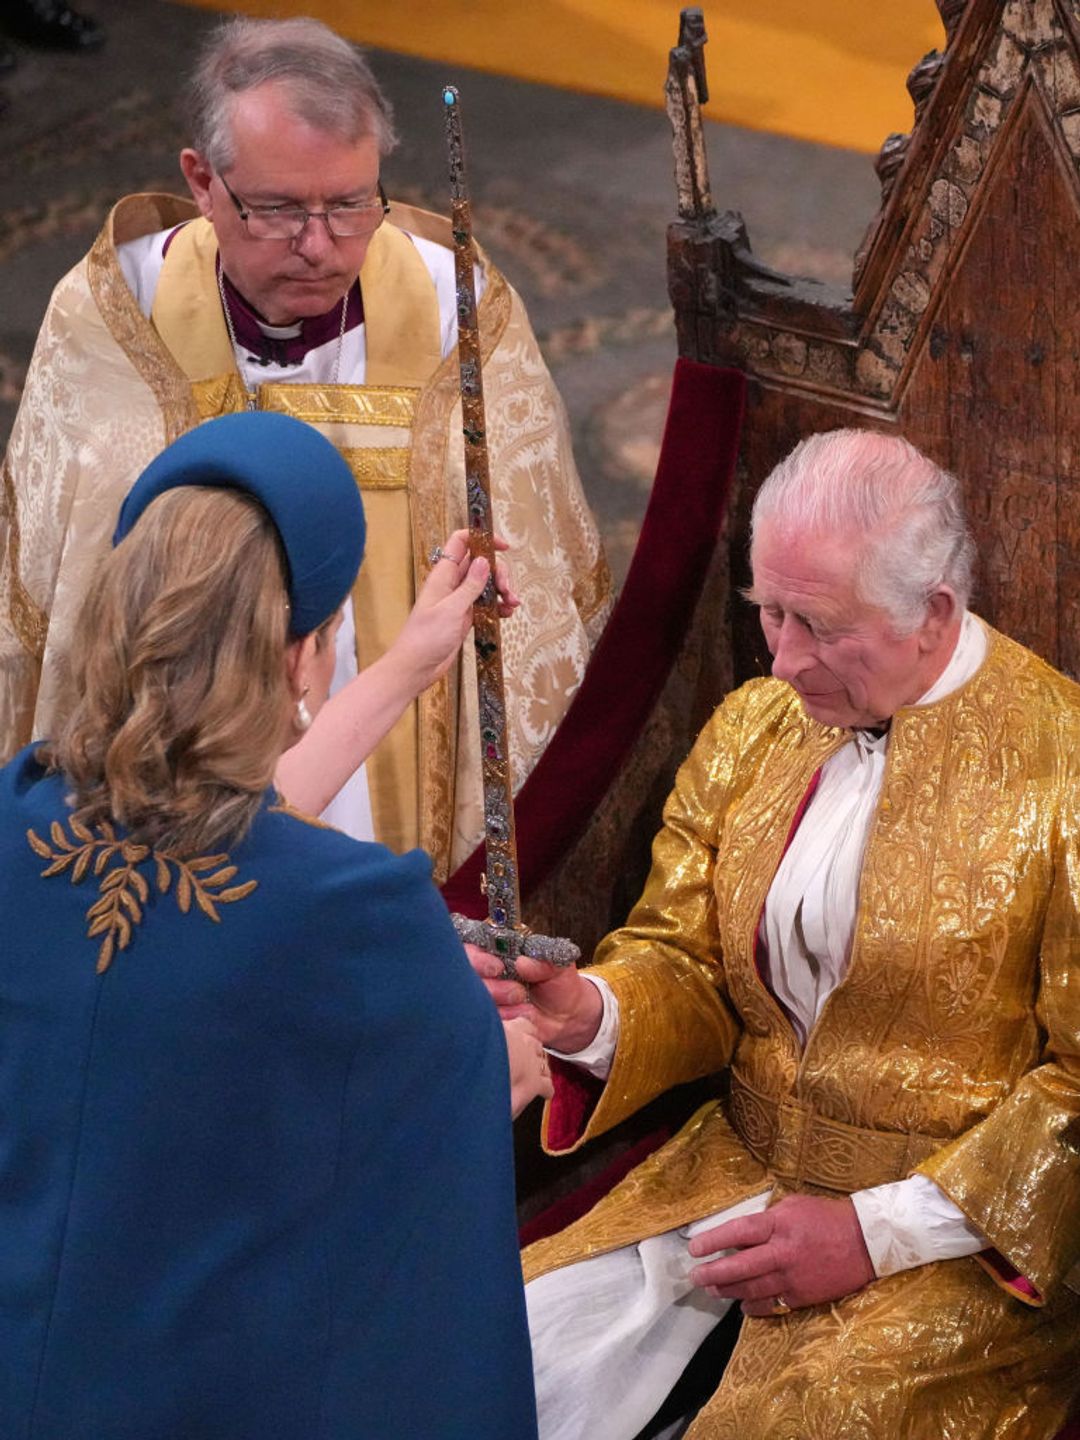 Lord President of the Council, Penny Mordaunt, presenting the Sword of State, to King Charles III during his coronation ceremony in Westminster Abbey